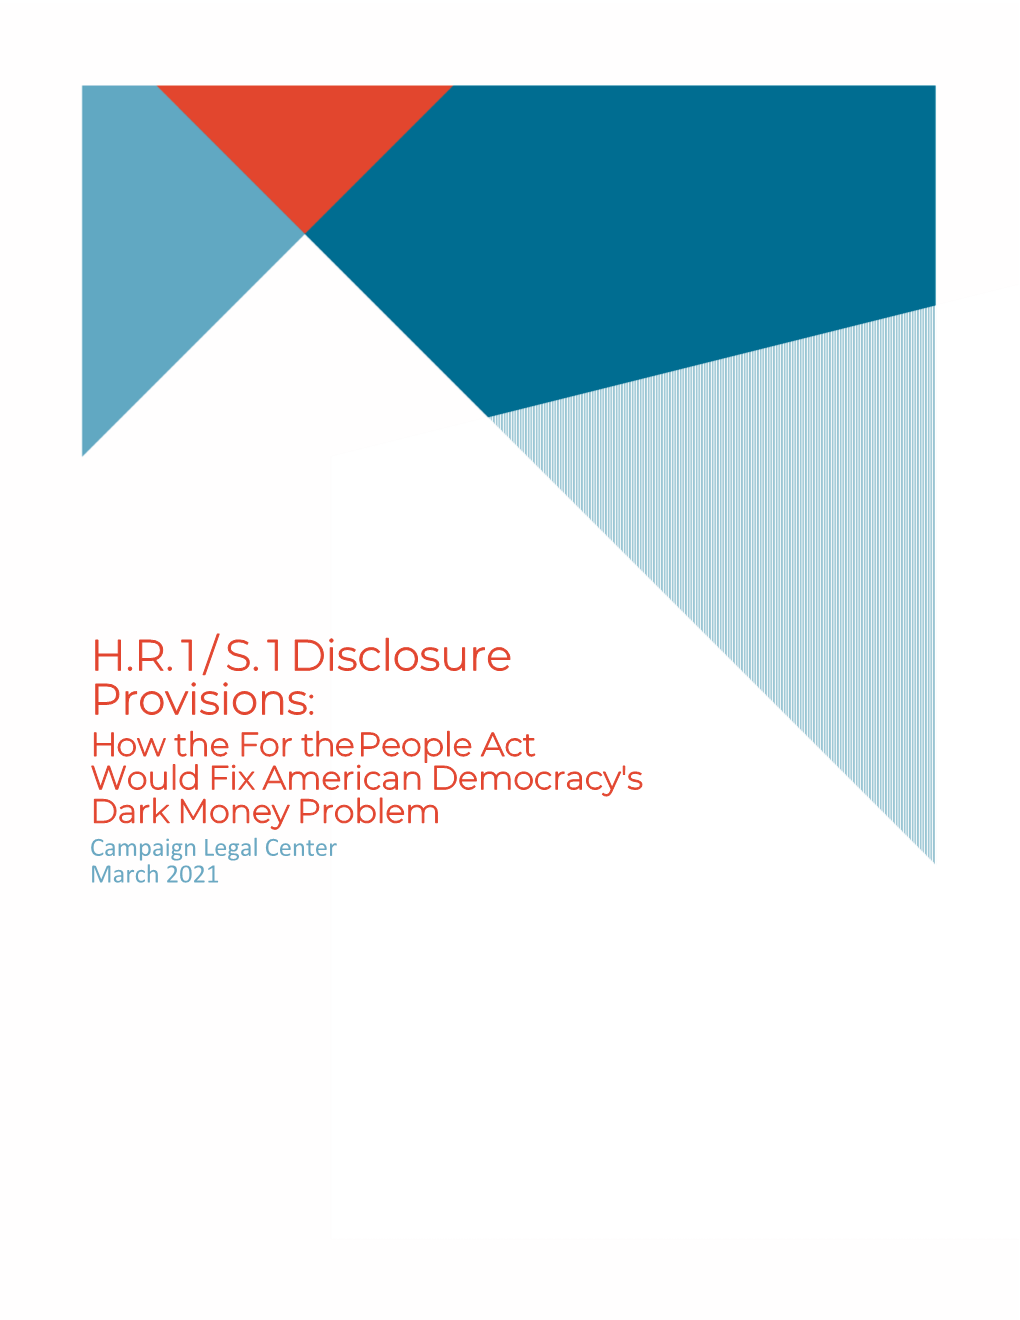 H.R. 1 / S. 1 Disclosure Provisions: How the for the People Act Would Fix American Democracy's Dark Money Problem Campaign Legal Center March 2021 Introduction